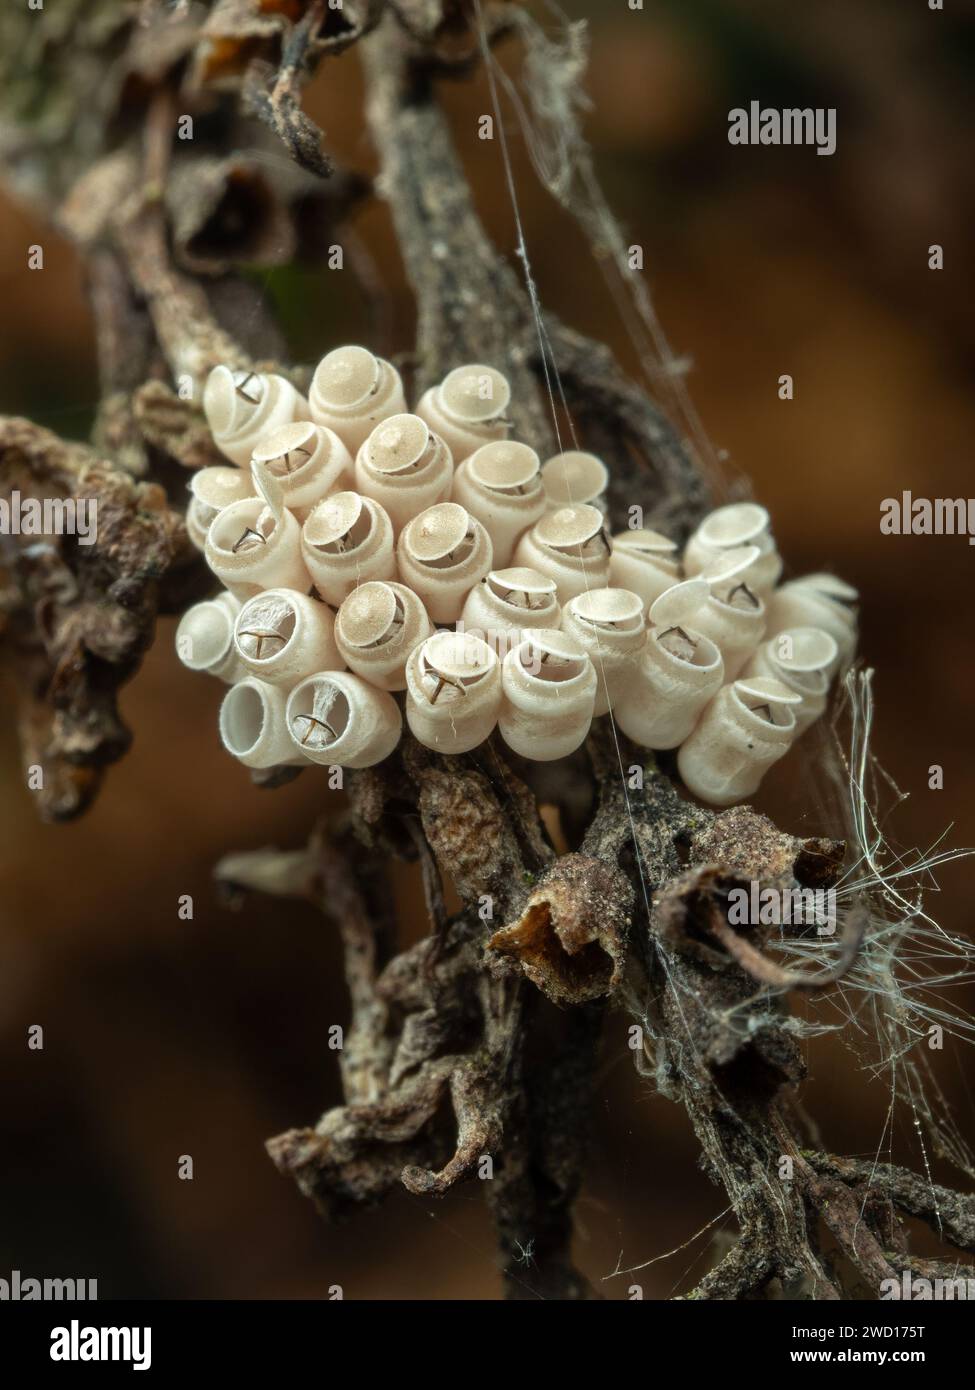 the recently hatched eggs of a stink bug (Chlorochroa ligata) Stock Photo